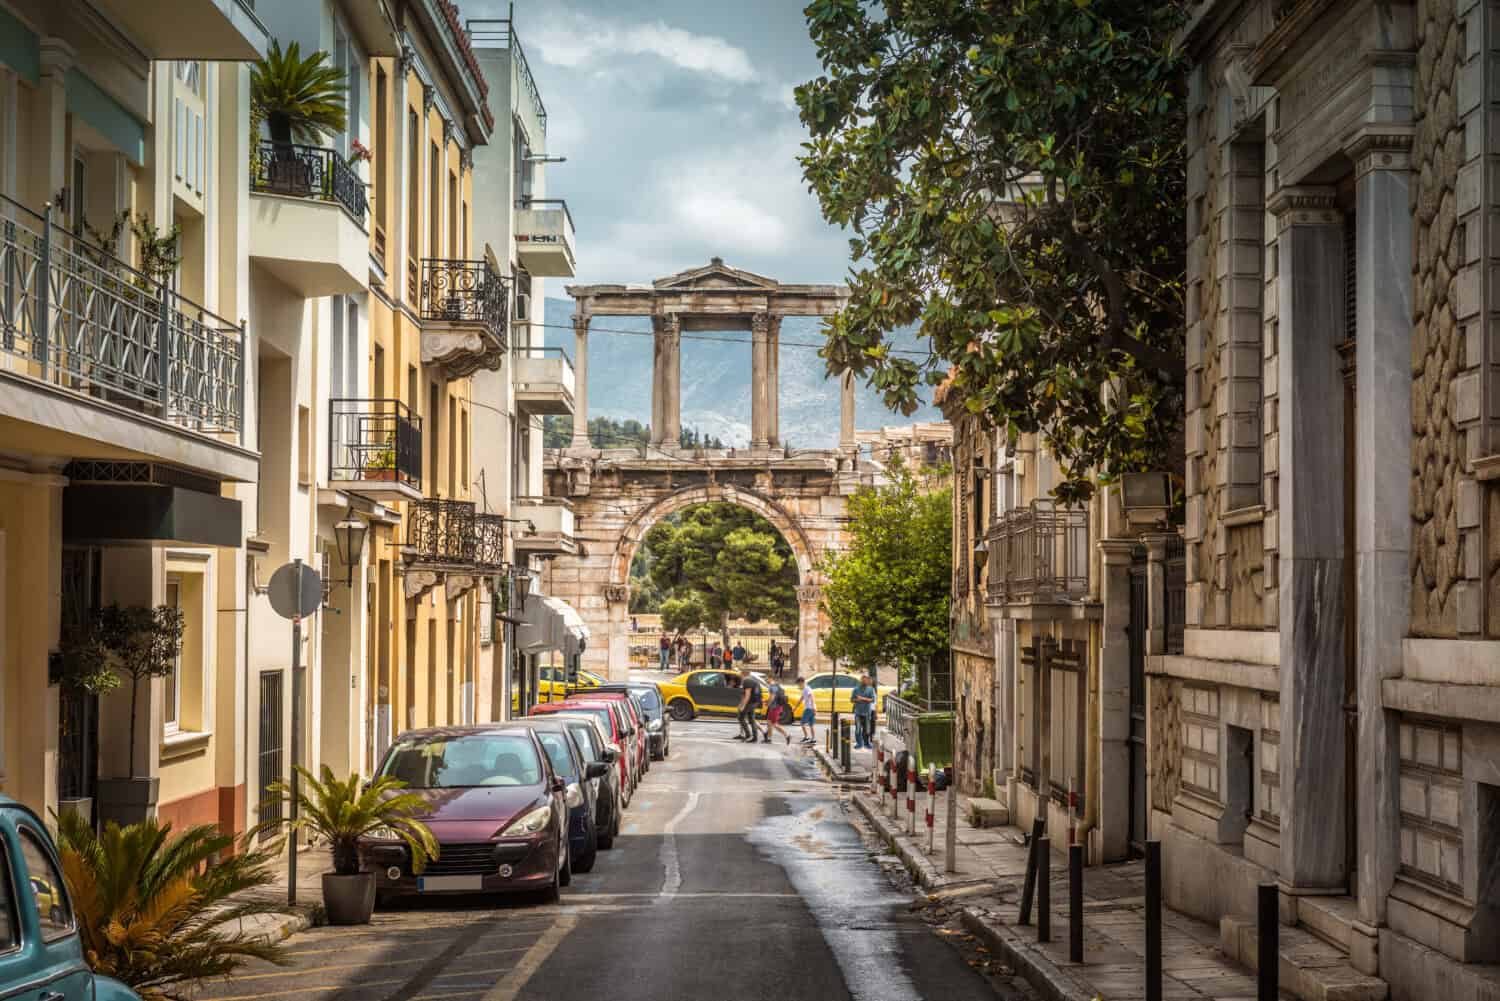 Street in Athens overlooking ancient Arch or Gate of Hadrian, Greece. It is one of main landmarks in Athens. Nice view of cozy houses, parked cars and historical monument in Athens city center.